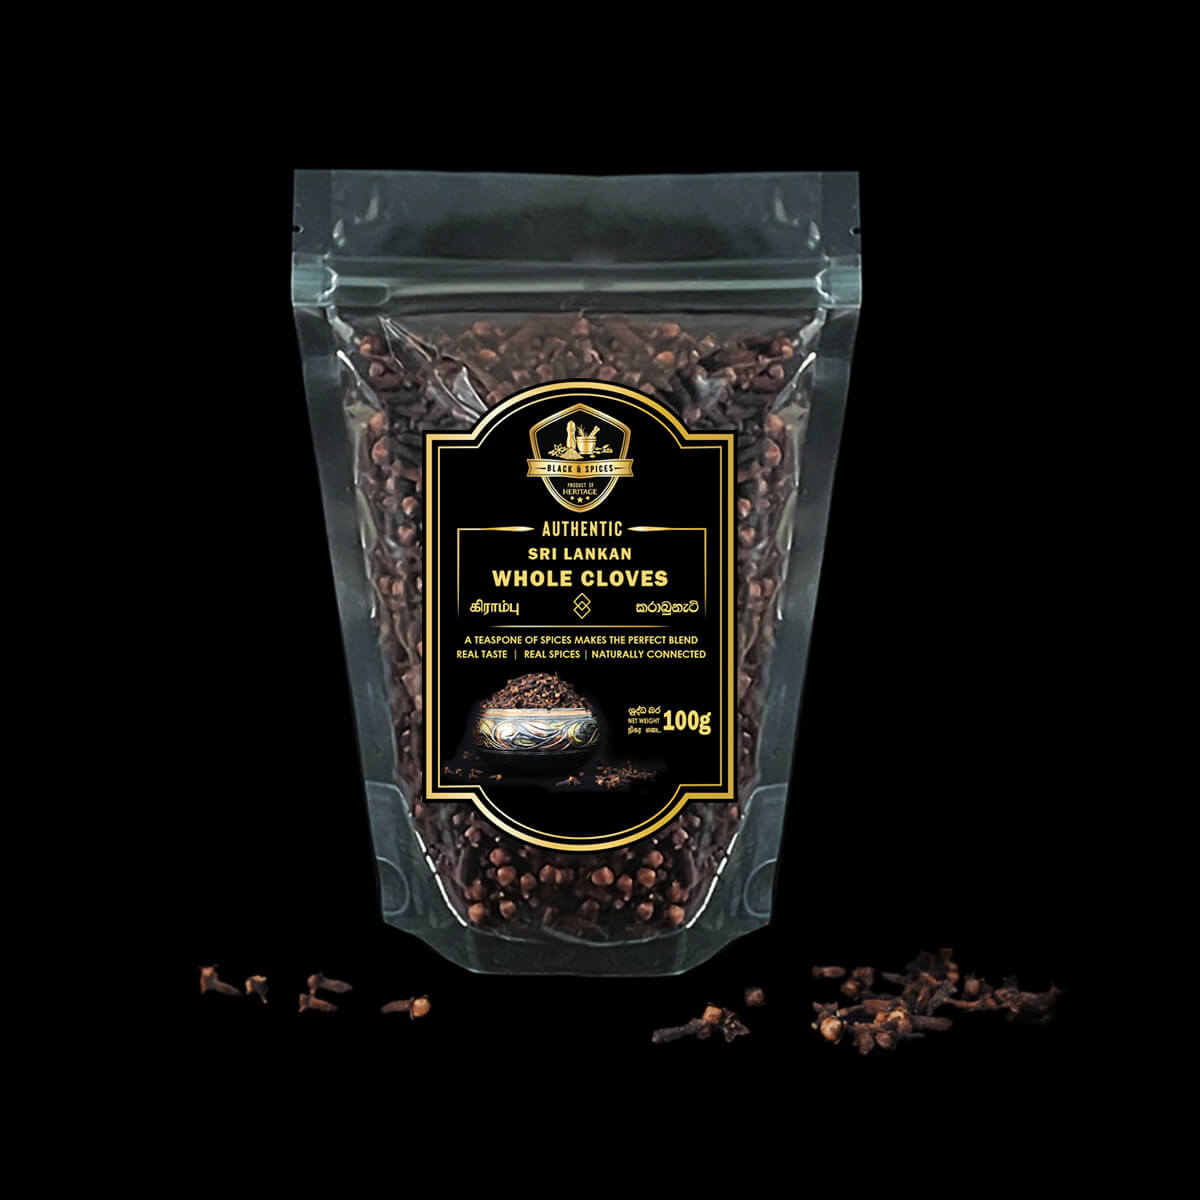 Goodspice Product Cloves Whole